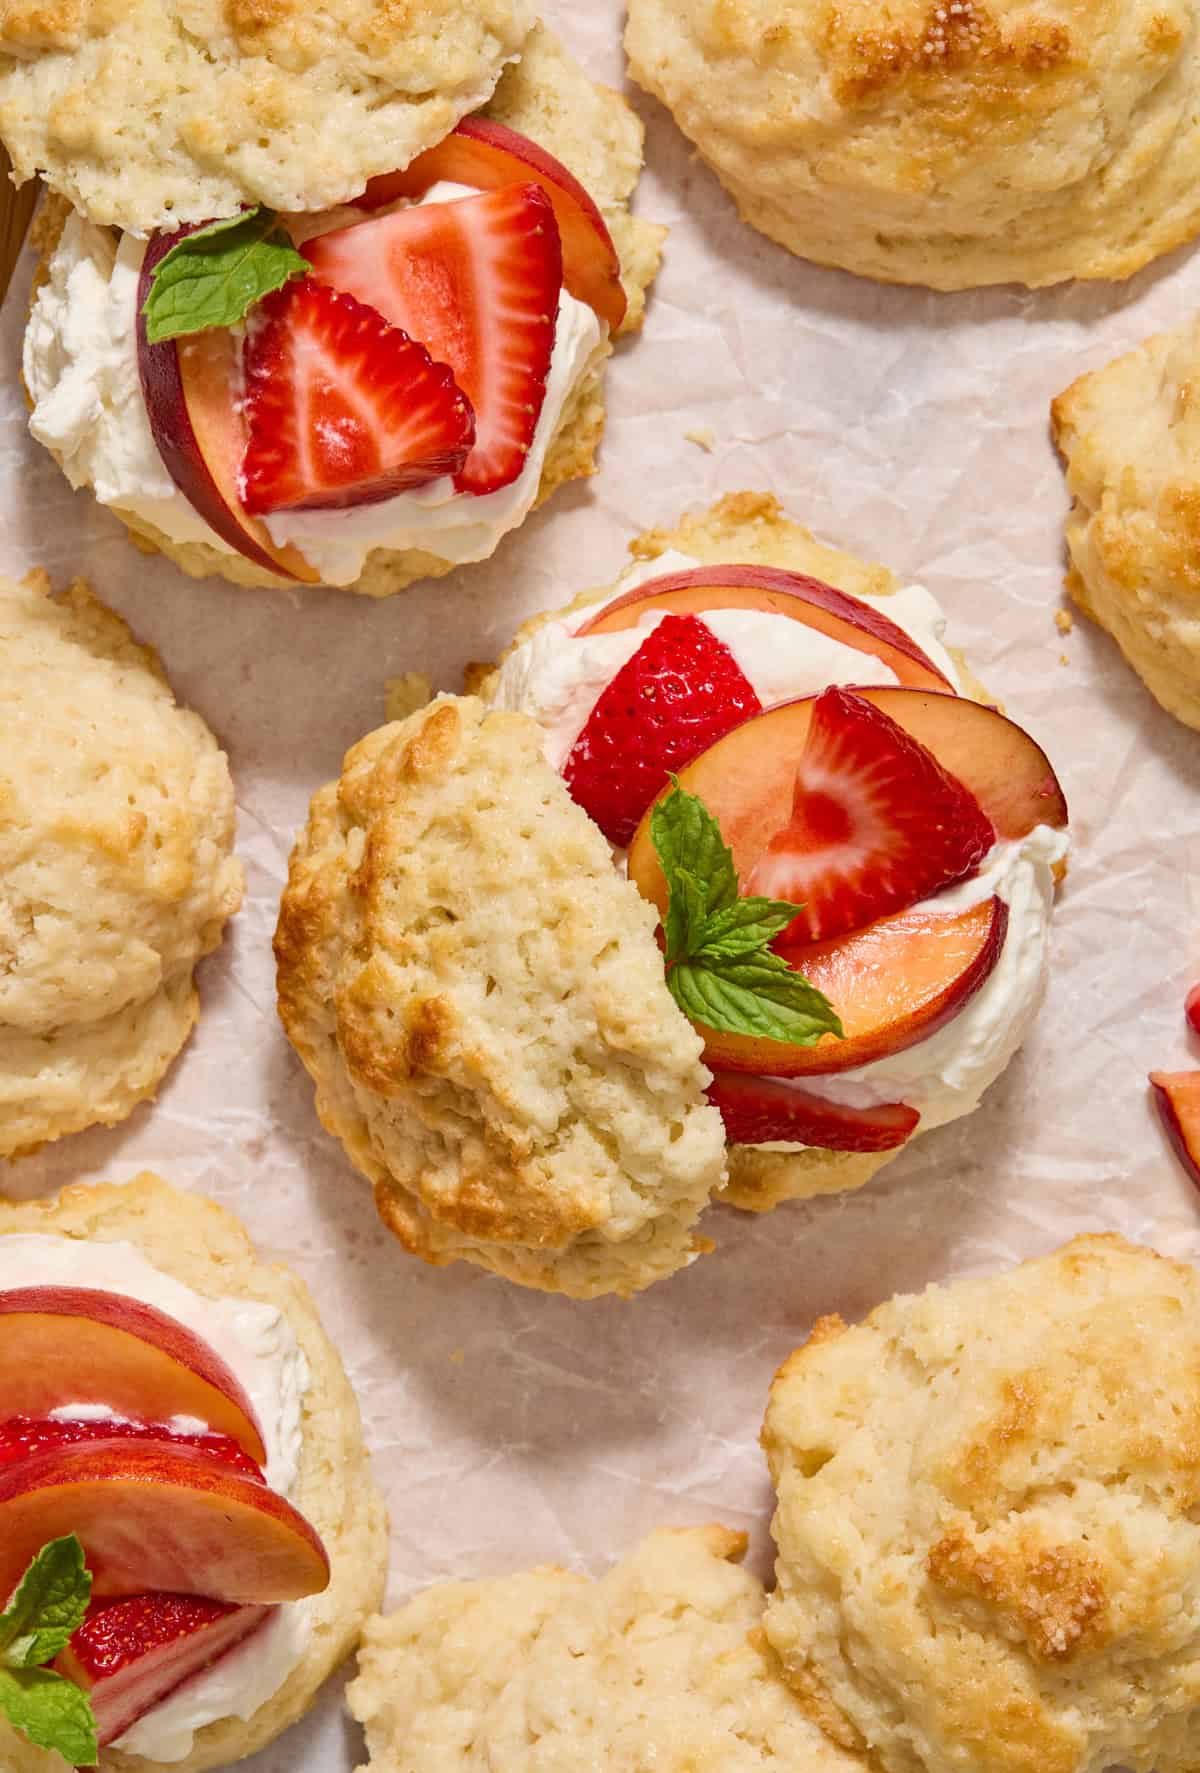 Overhead view of strawberry peach shortcakes with buttermilk biscuit tops propped to the side to show fruit and mint leaves on whipped cream.